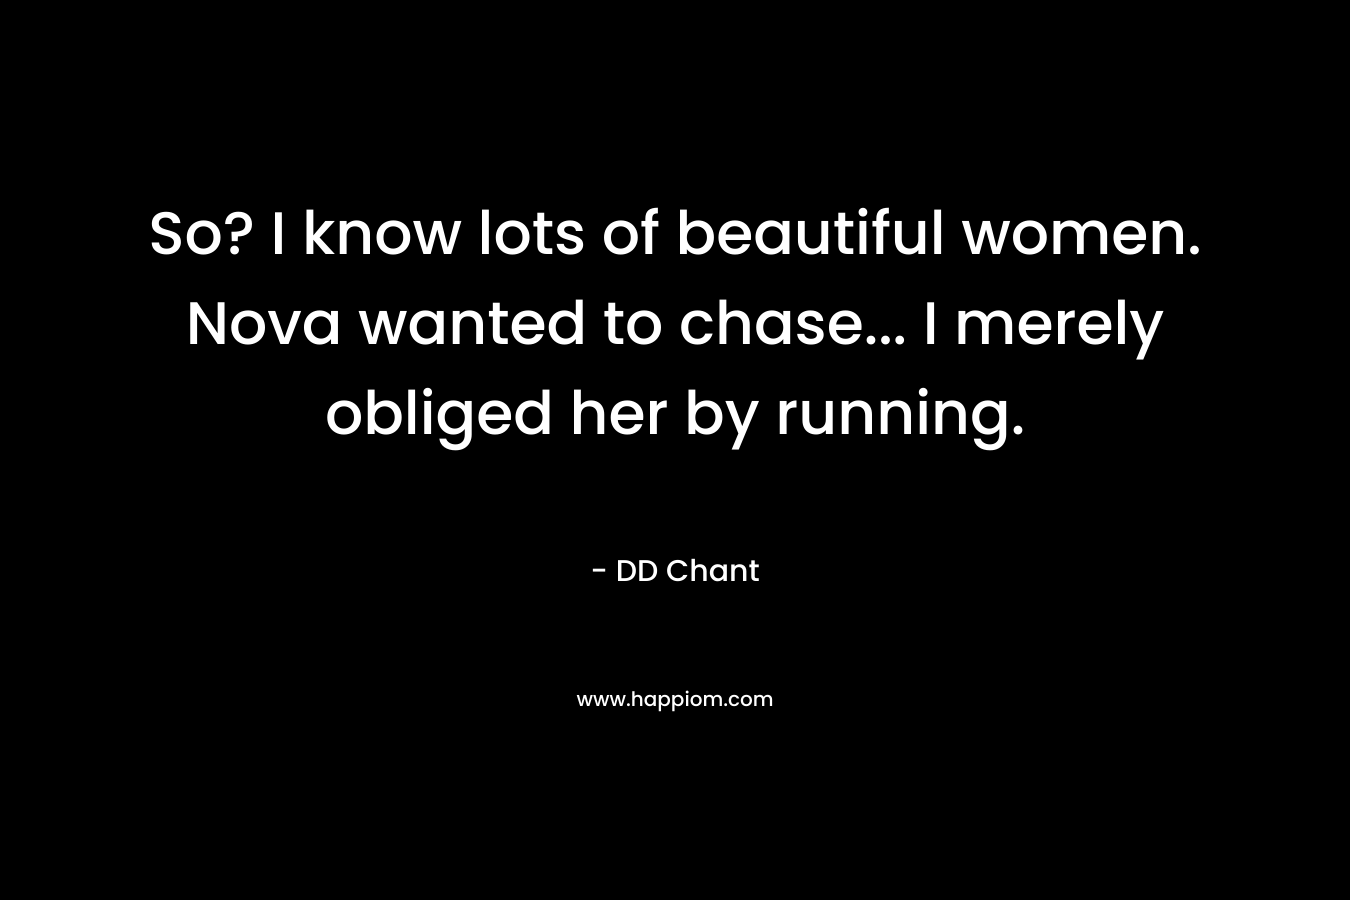 So? I know lots of beautiful women. Nova wanted to chase... I merely obliged her by running.